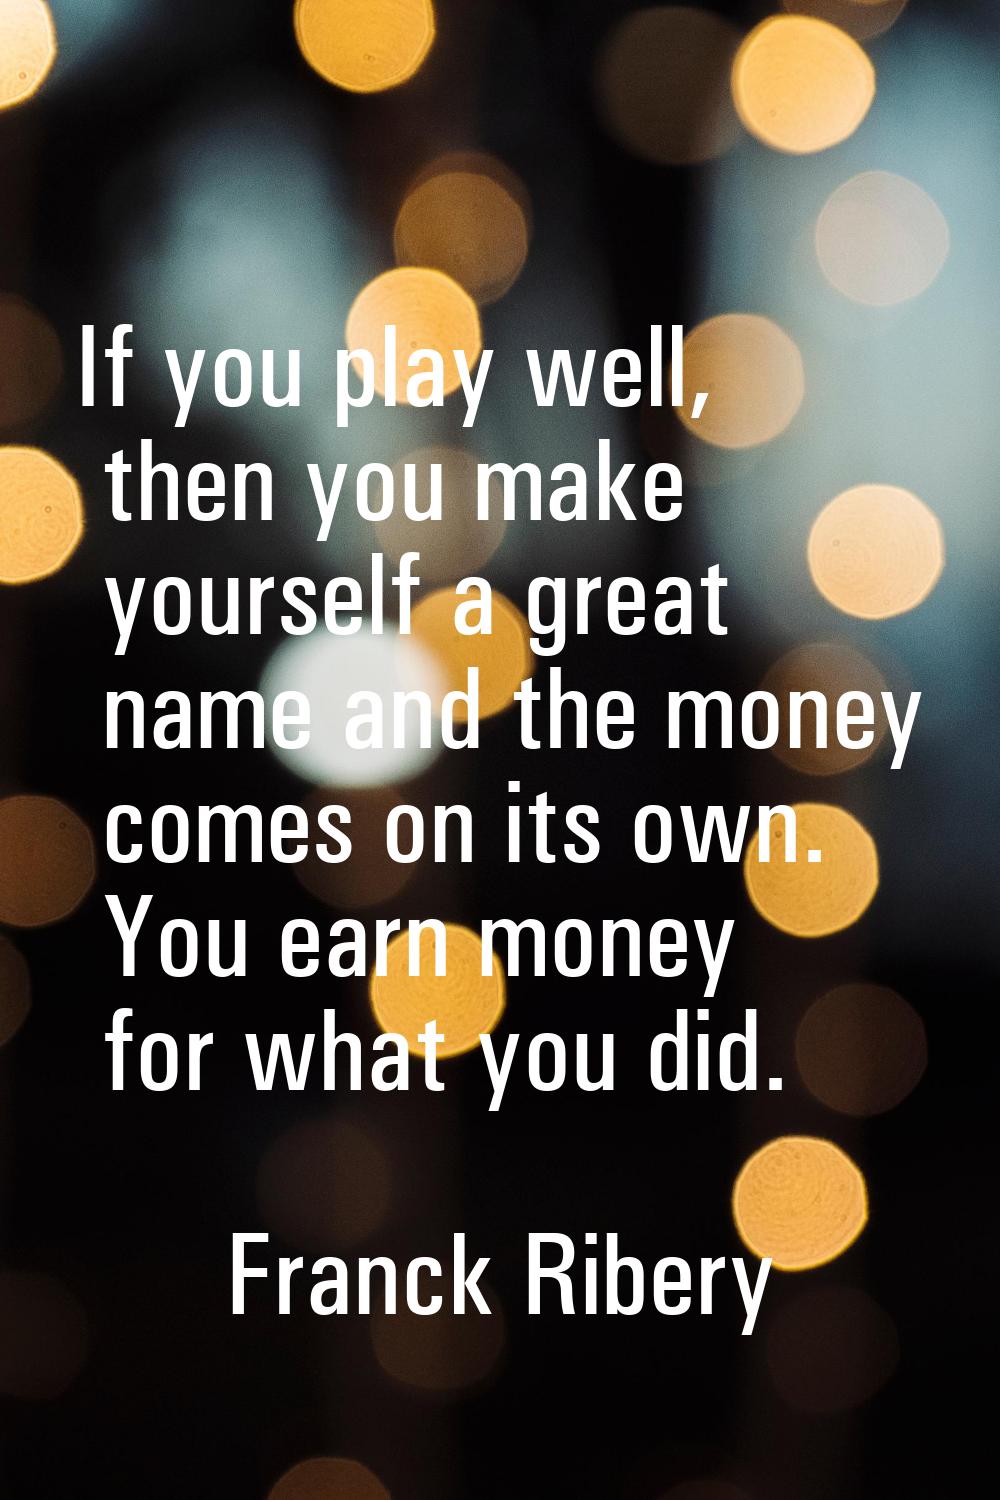 If you play well, then you make yourself a great name and the money comes on its own. You earn mone